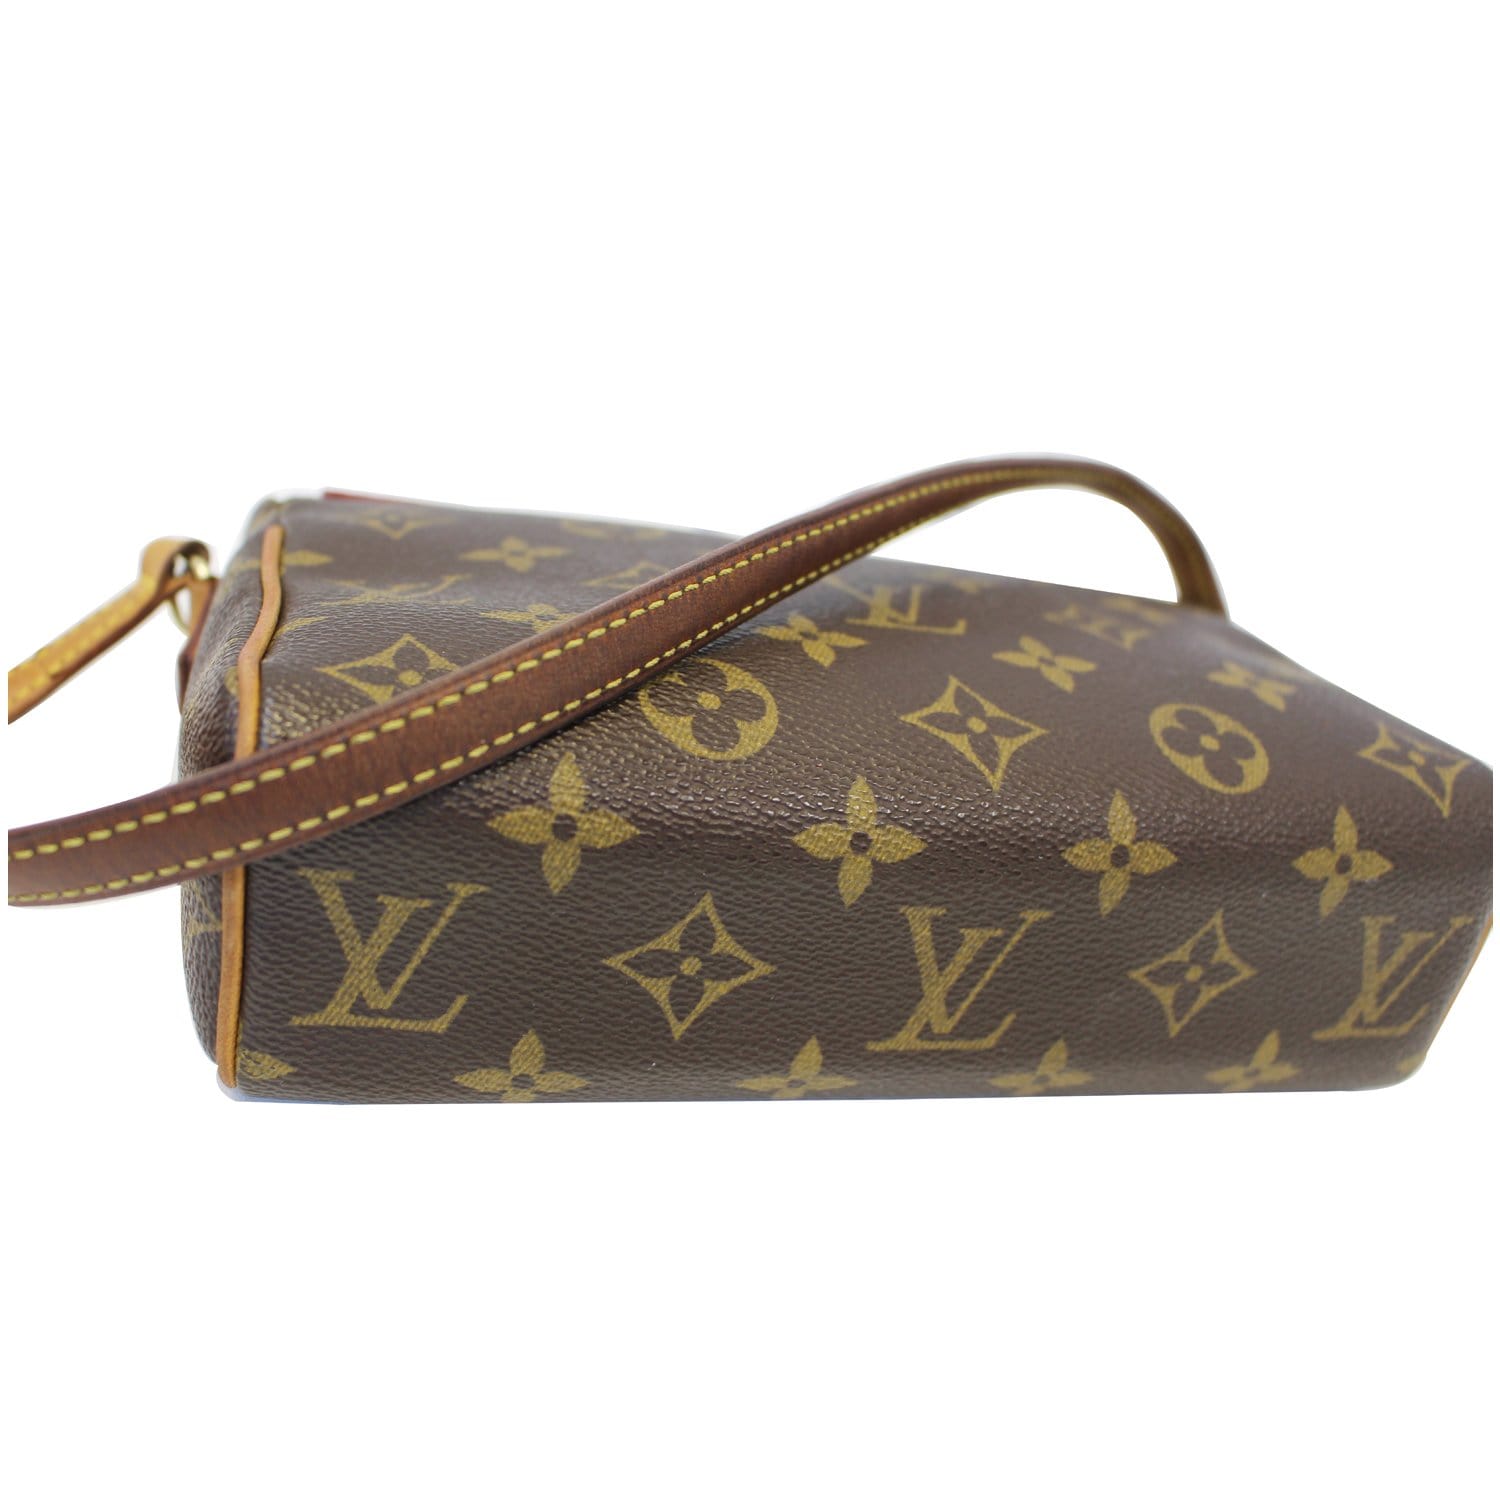 Louis Vuitton Chantilly Monogram - For Sale on 1stDibs